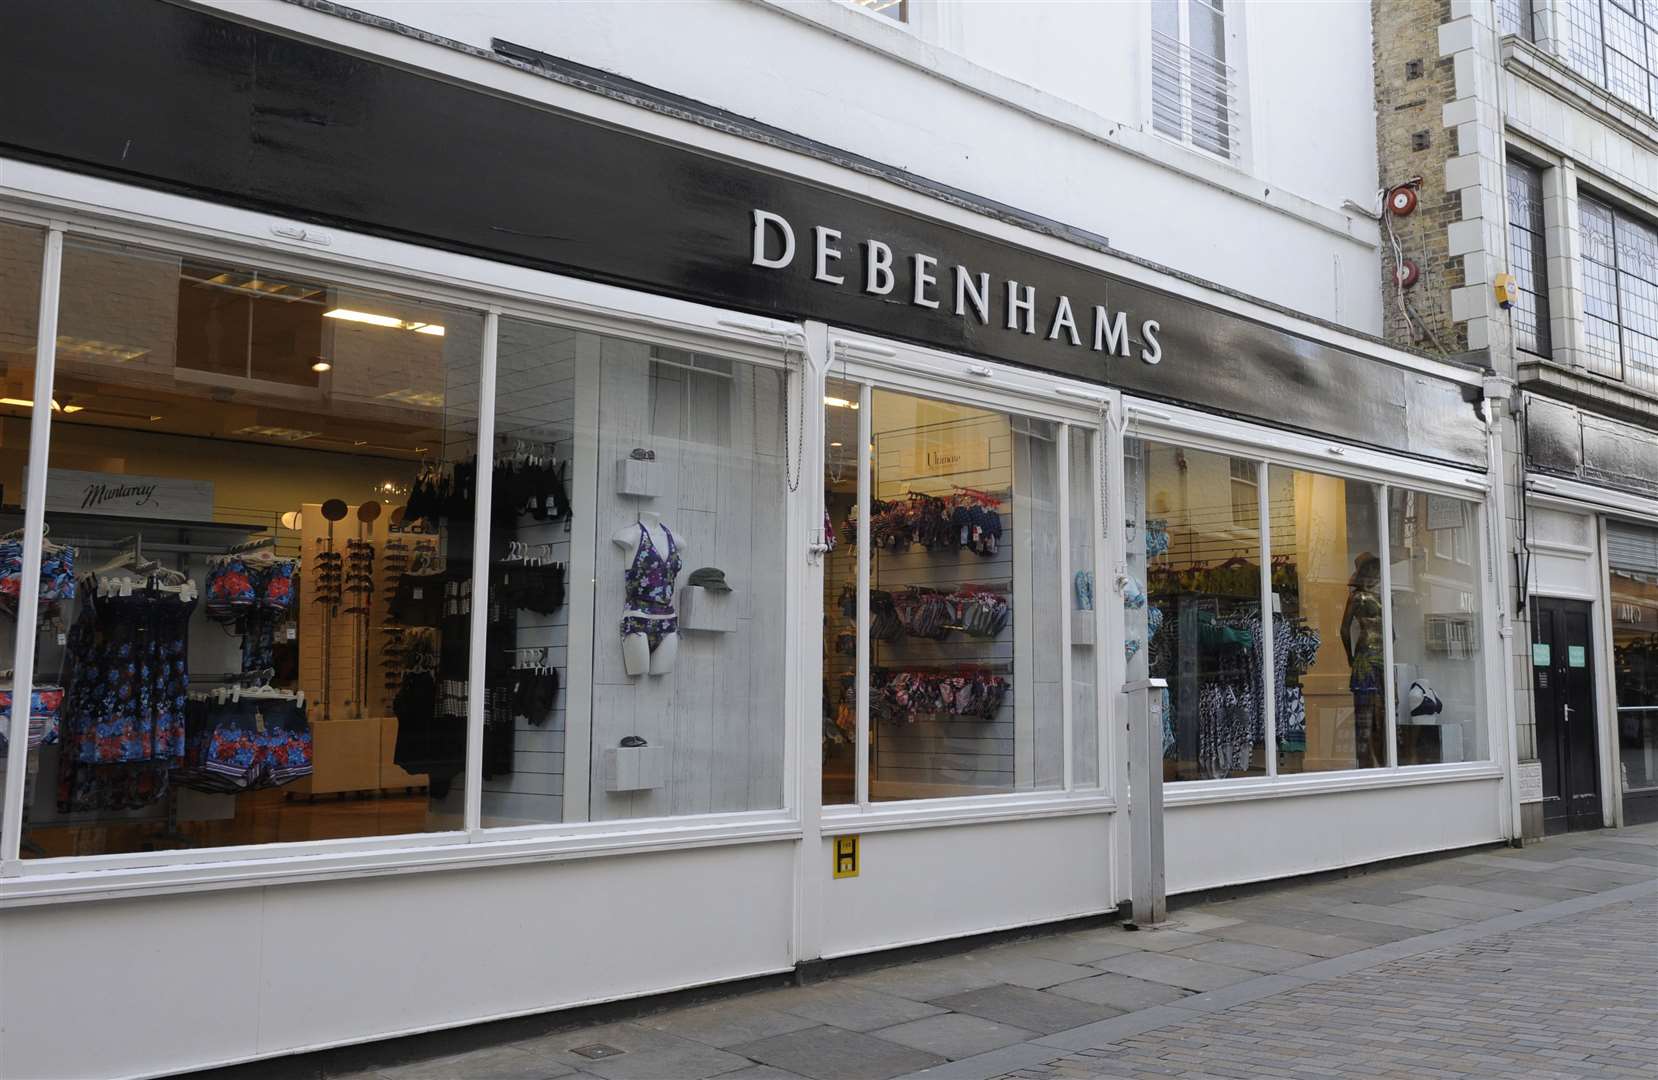 Debenhams is likely to go into administration this week